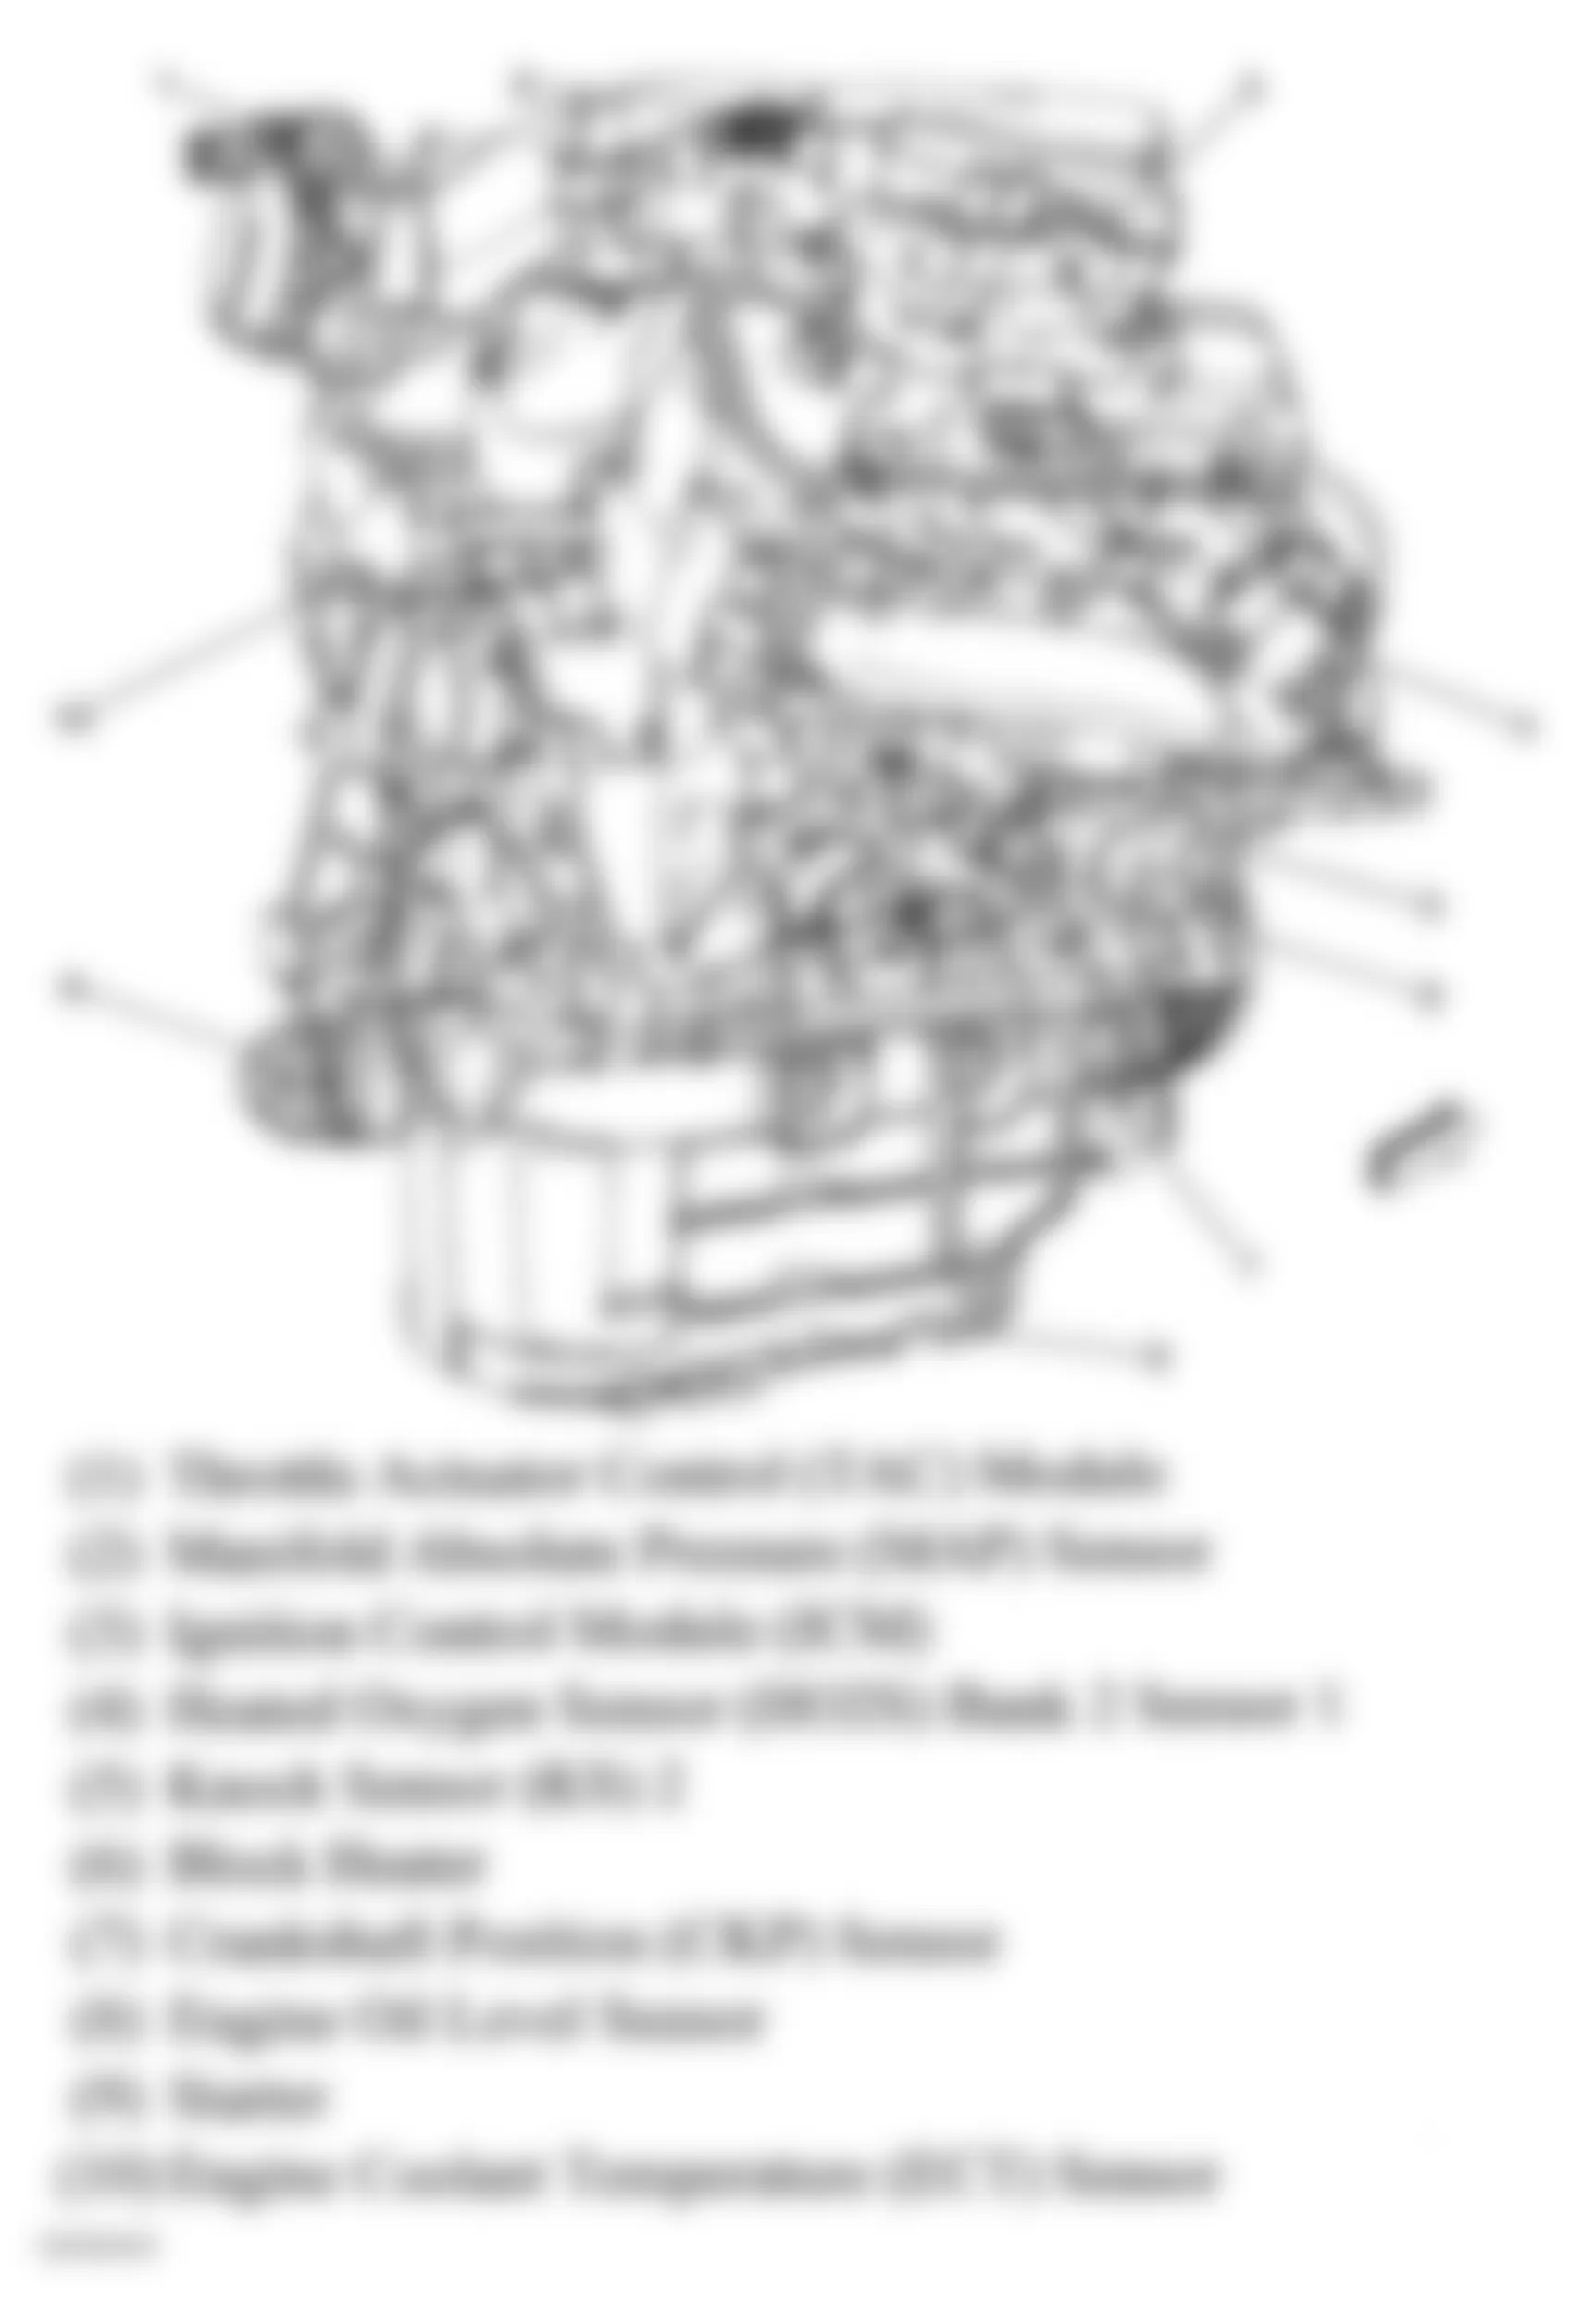 Chevrolet Malibu LS 2007 - Component Locations -  Right Side Of Engine (3.9L)